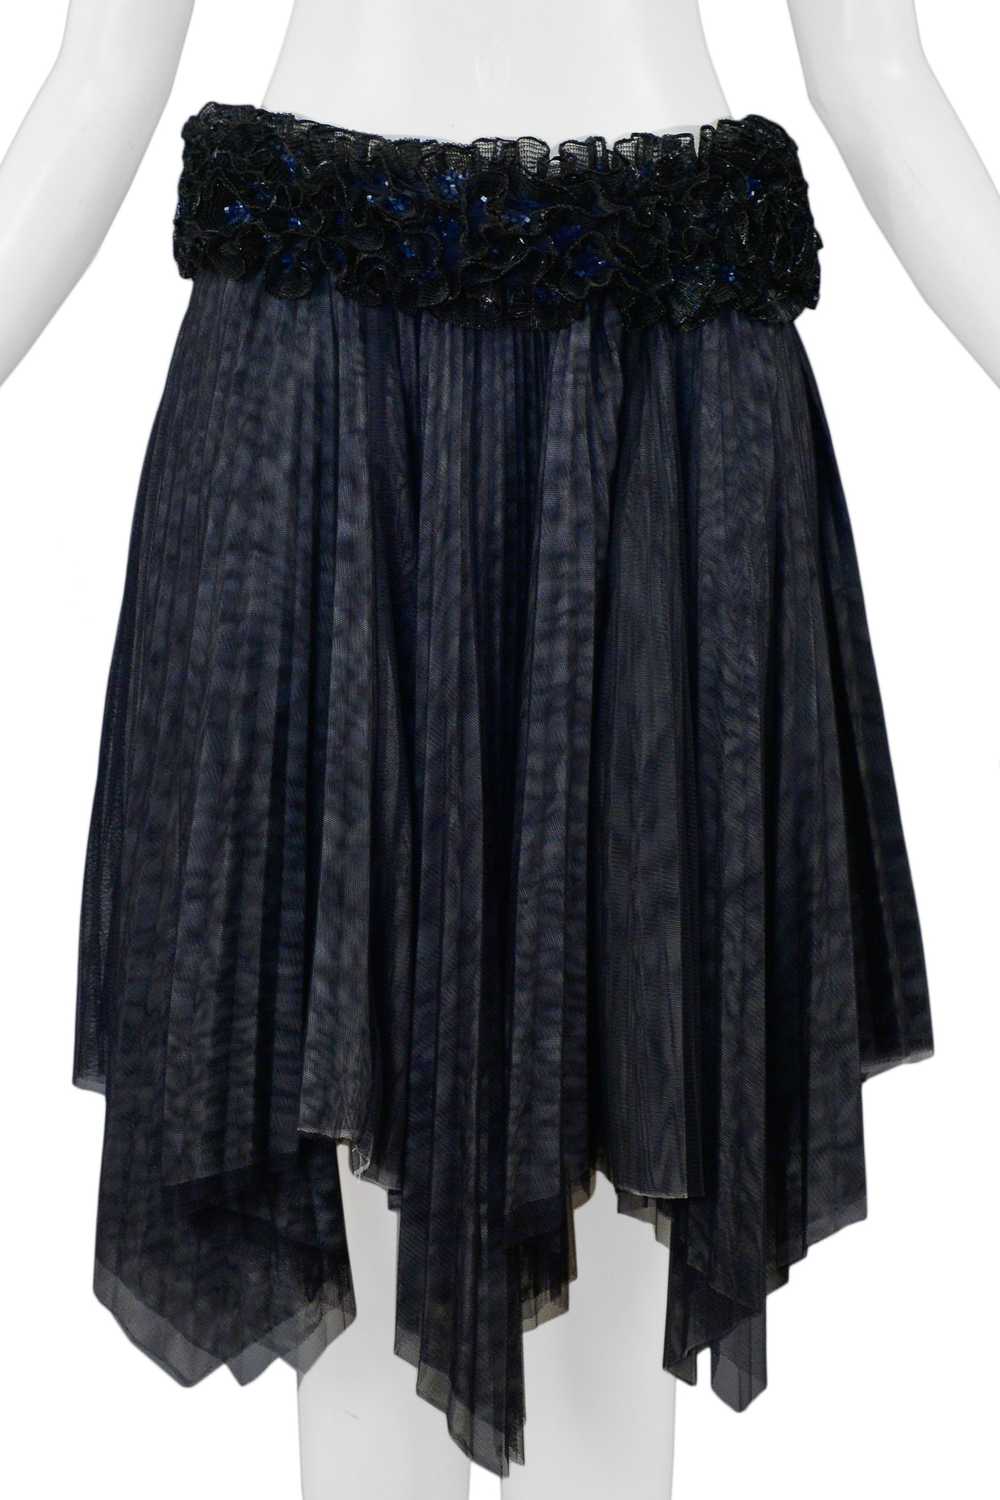 CHANEL PLEATED SKIRT WITH FLORAL SEQUIN WAISTBAND - image 4